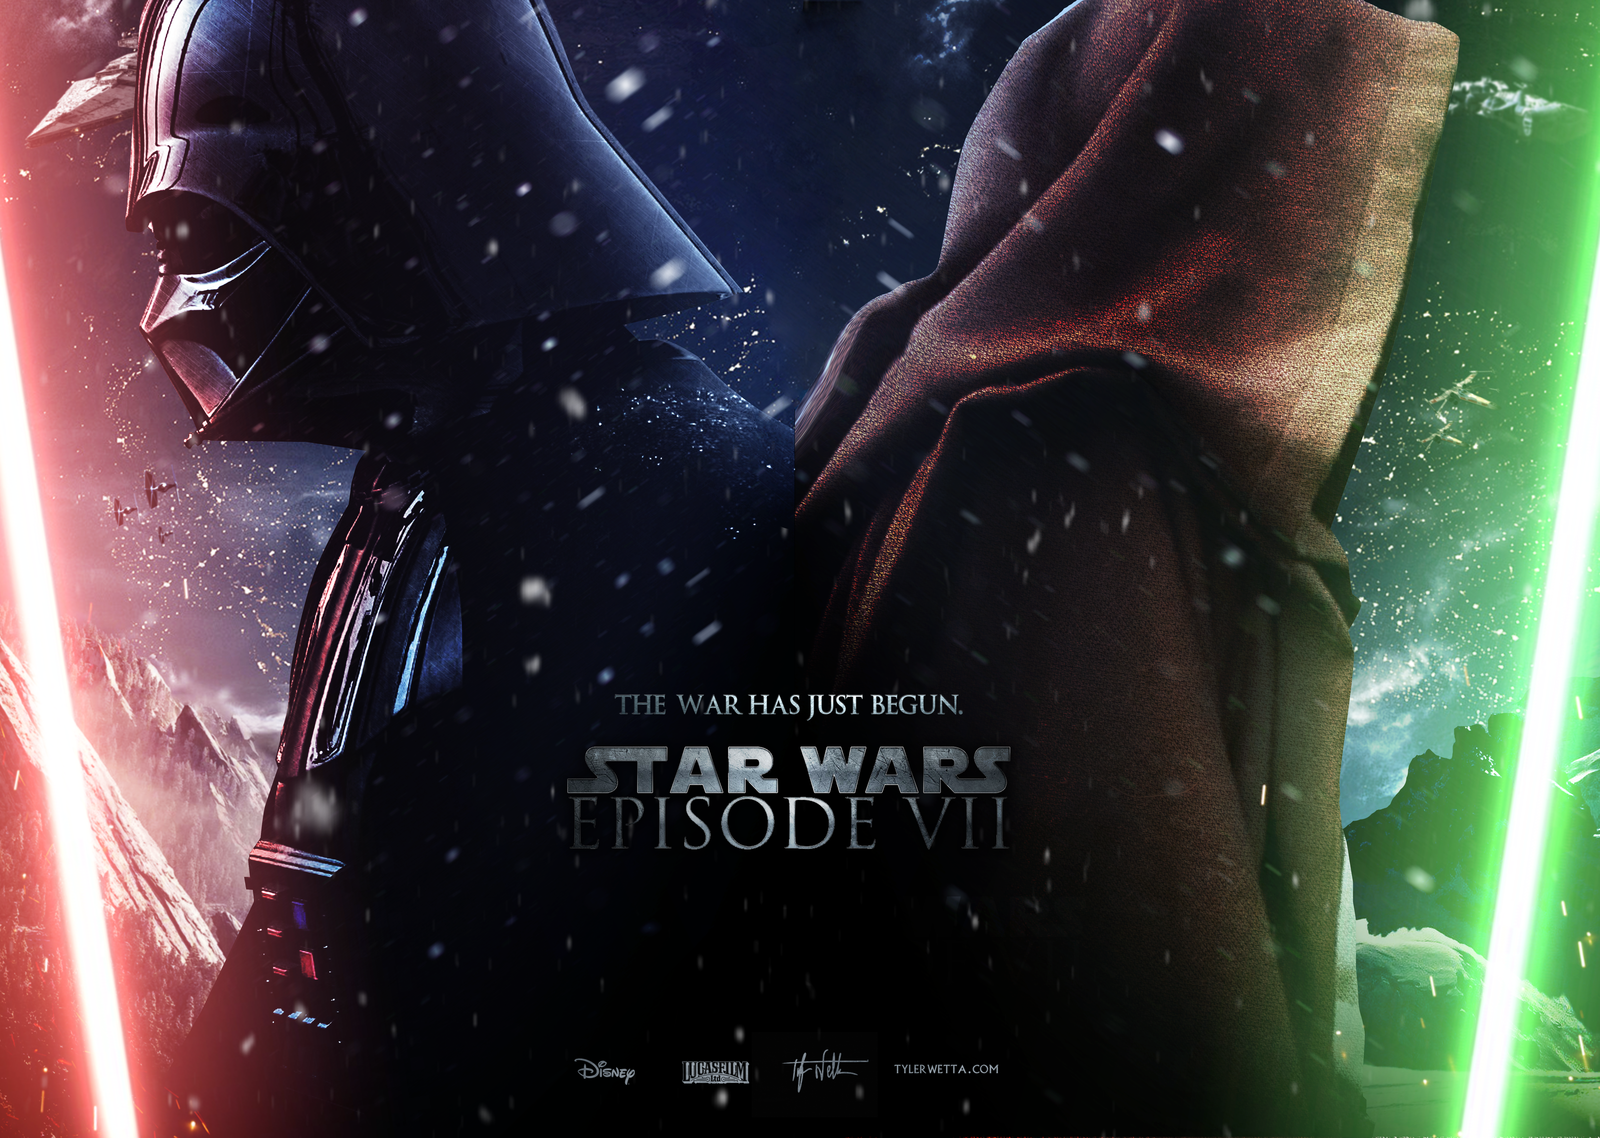 Star Wars Force Awakens with images kirkjw3 Storify